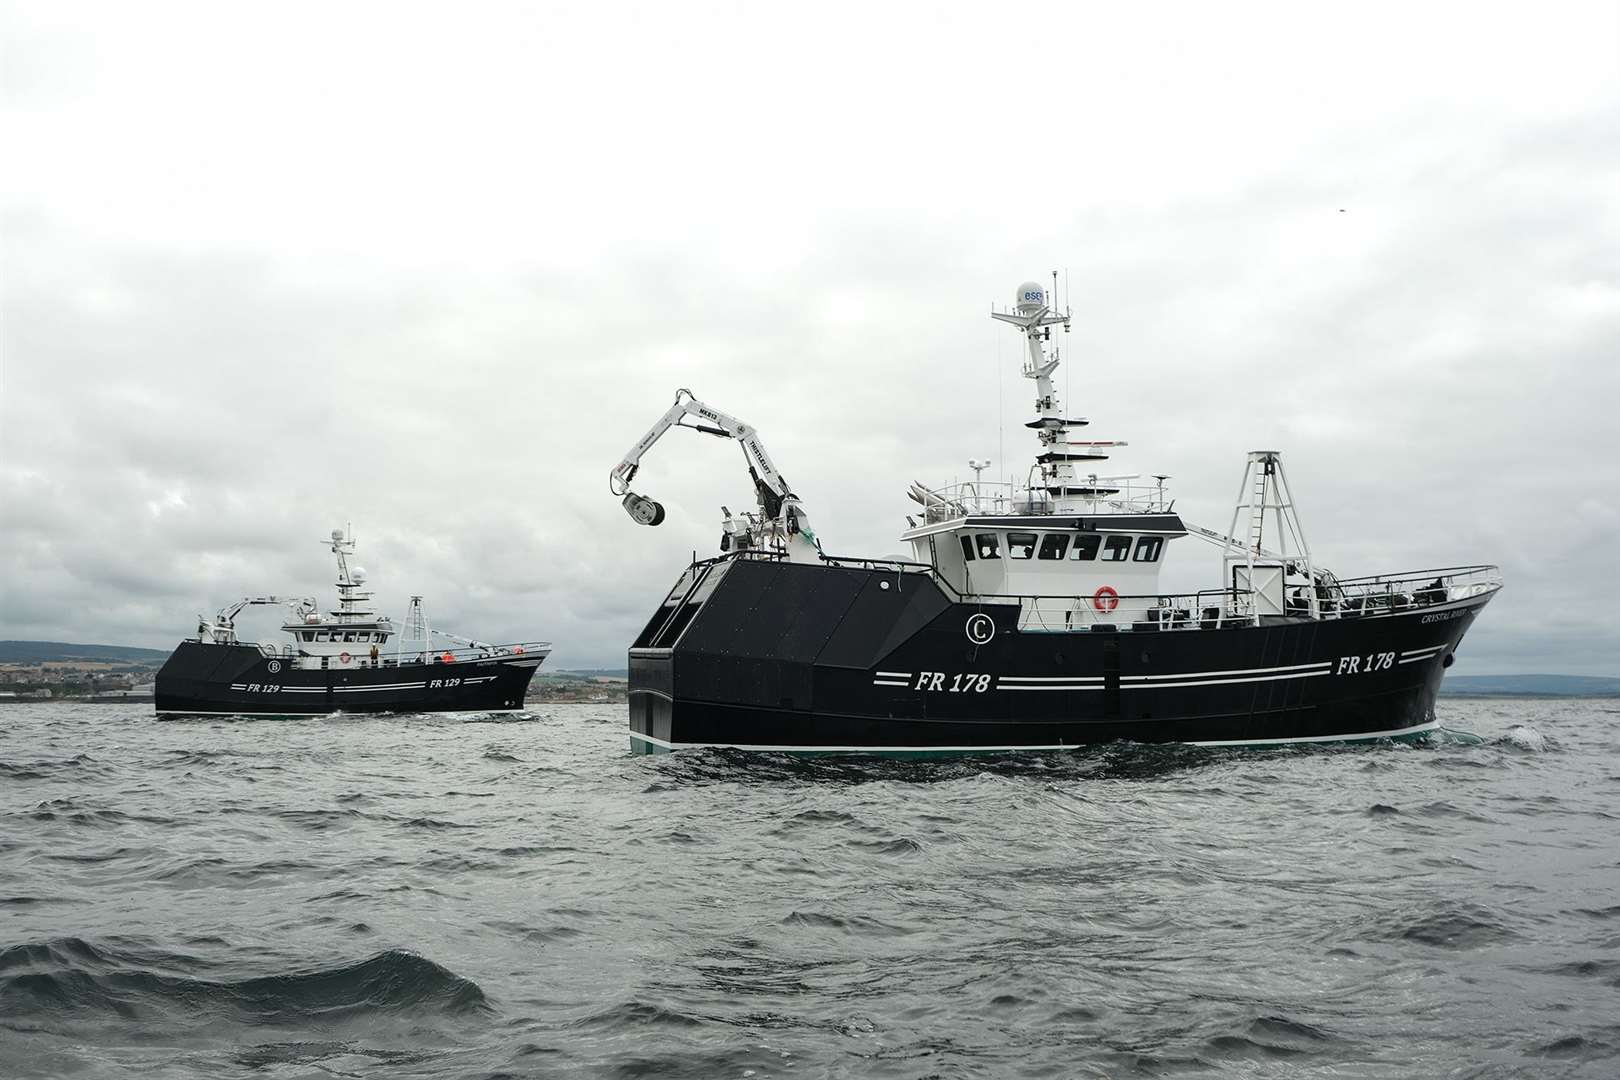 Macduff Shipyards has handed over pair trawlers Faithful and Crystal River.